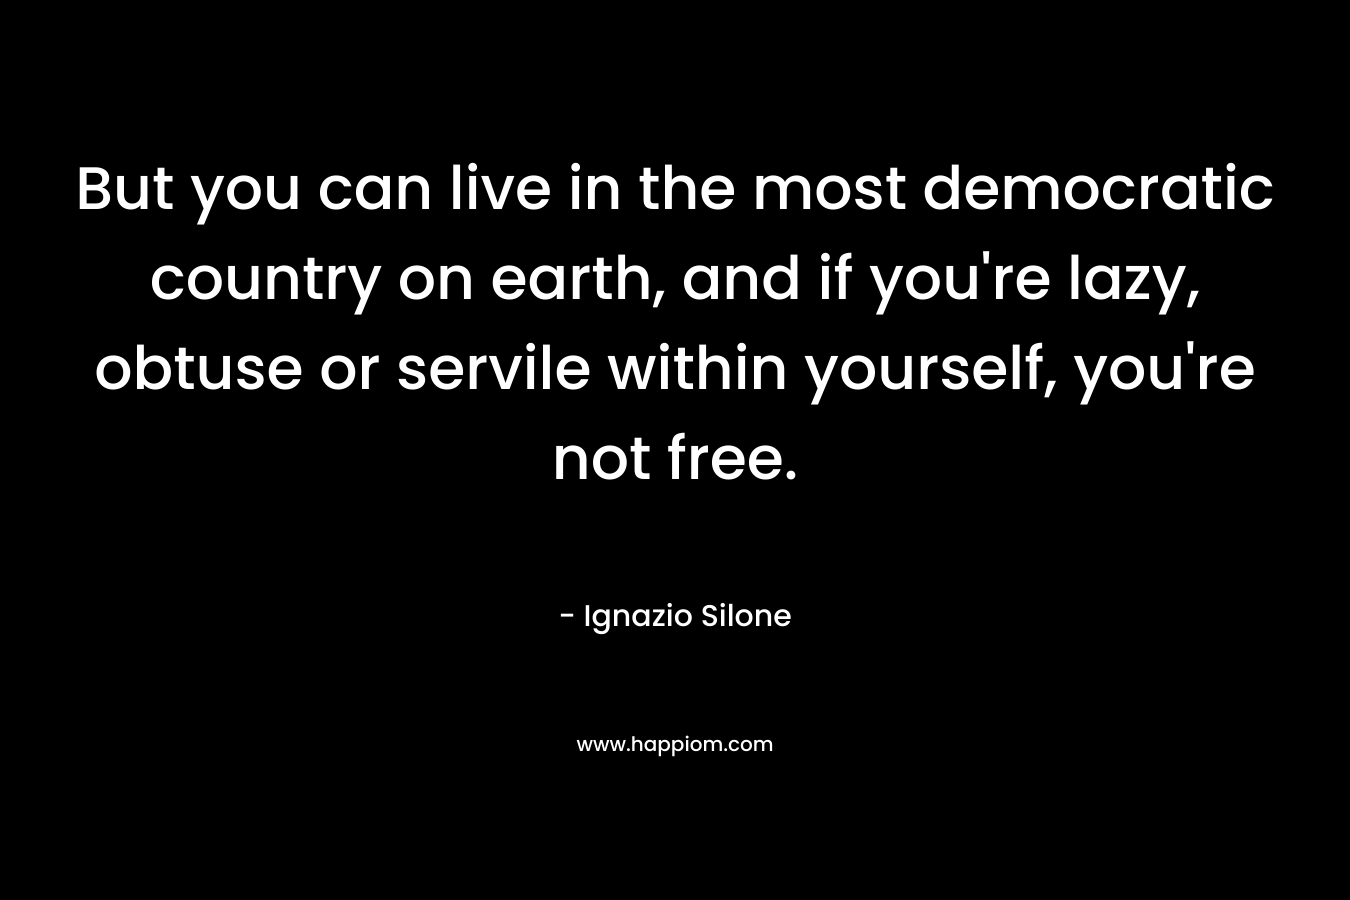 But you can live in the most democratic country on earth, and if you’re lazy, obtuse or servile within yourself, you’re not free. – Ignazio Silone